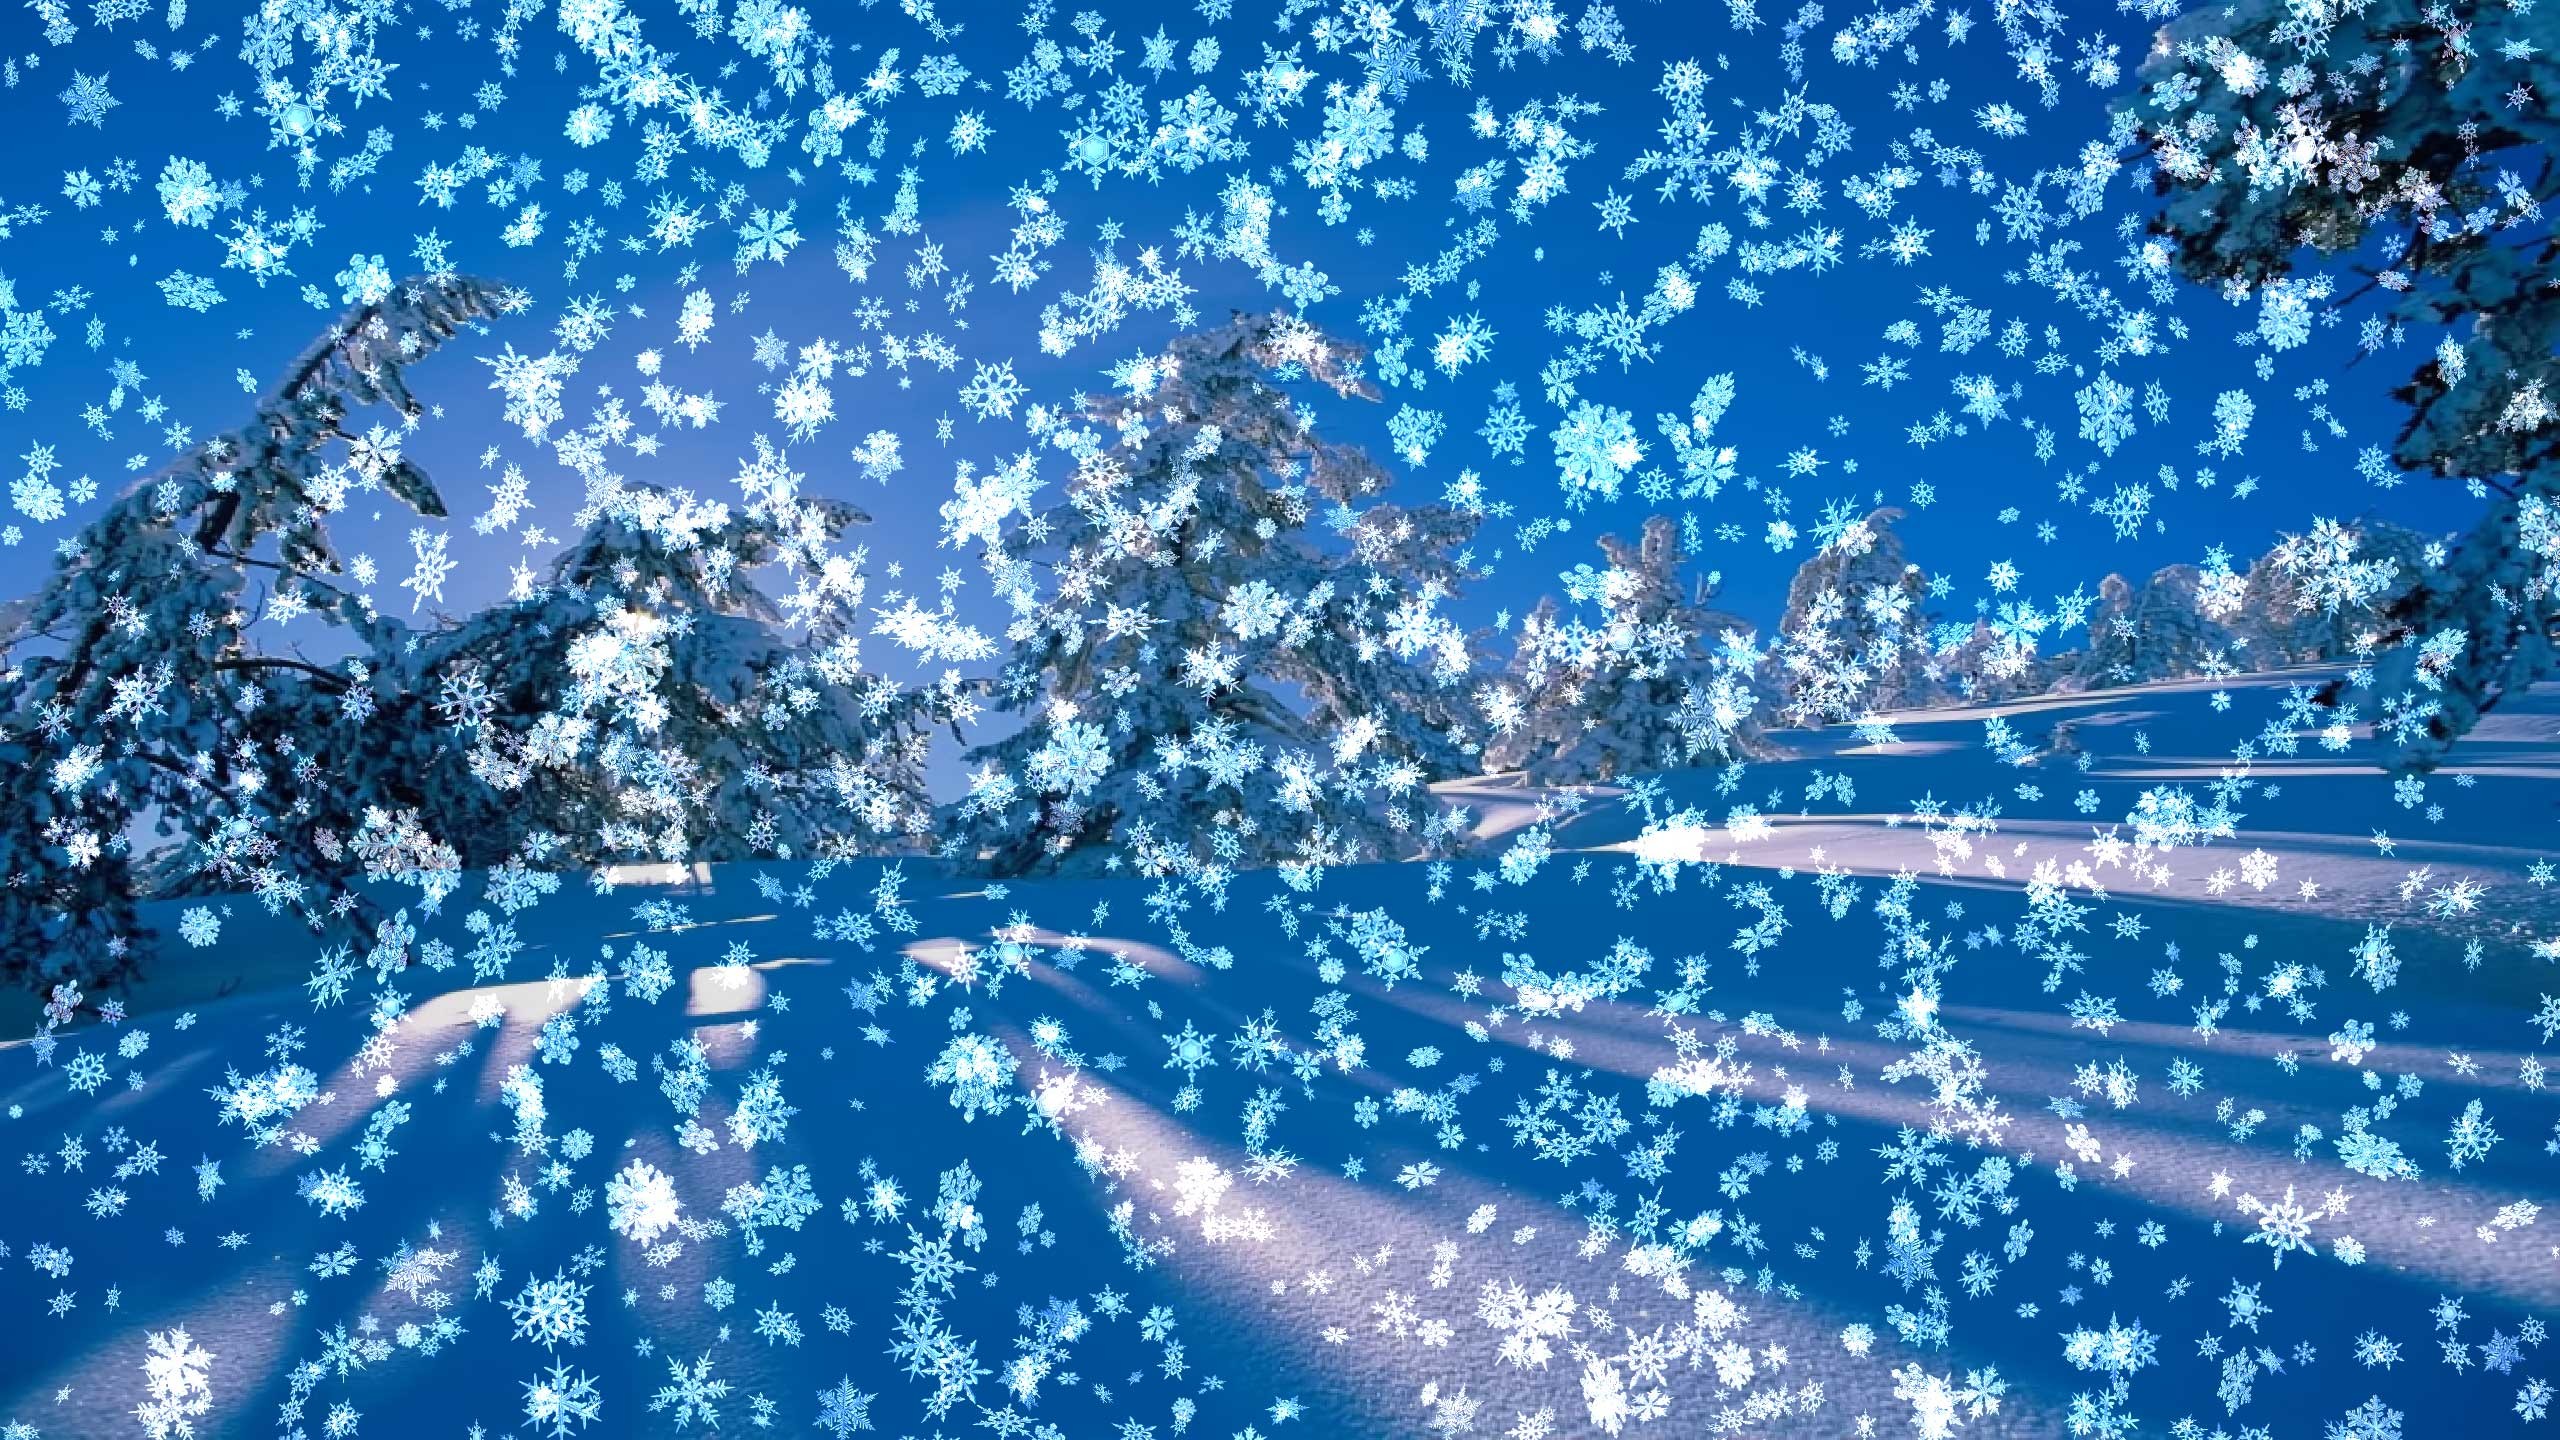 2560x1440 Snowy Desktop is perfect to get you in the mood for the winter holidays. A  beautiful snow scene with falling snow on your desktop, blue sky, trees  covered ...